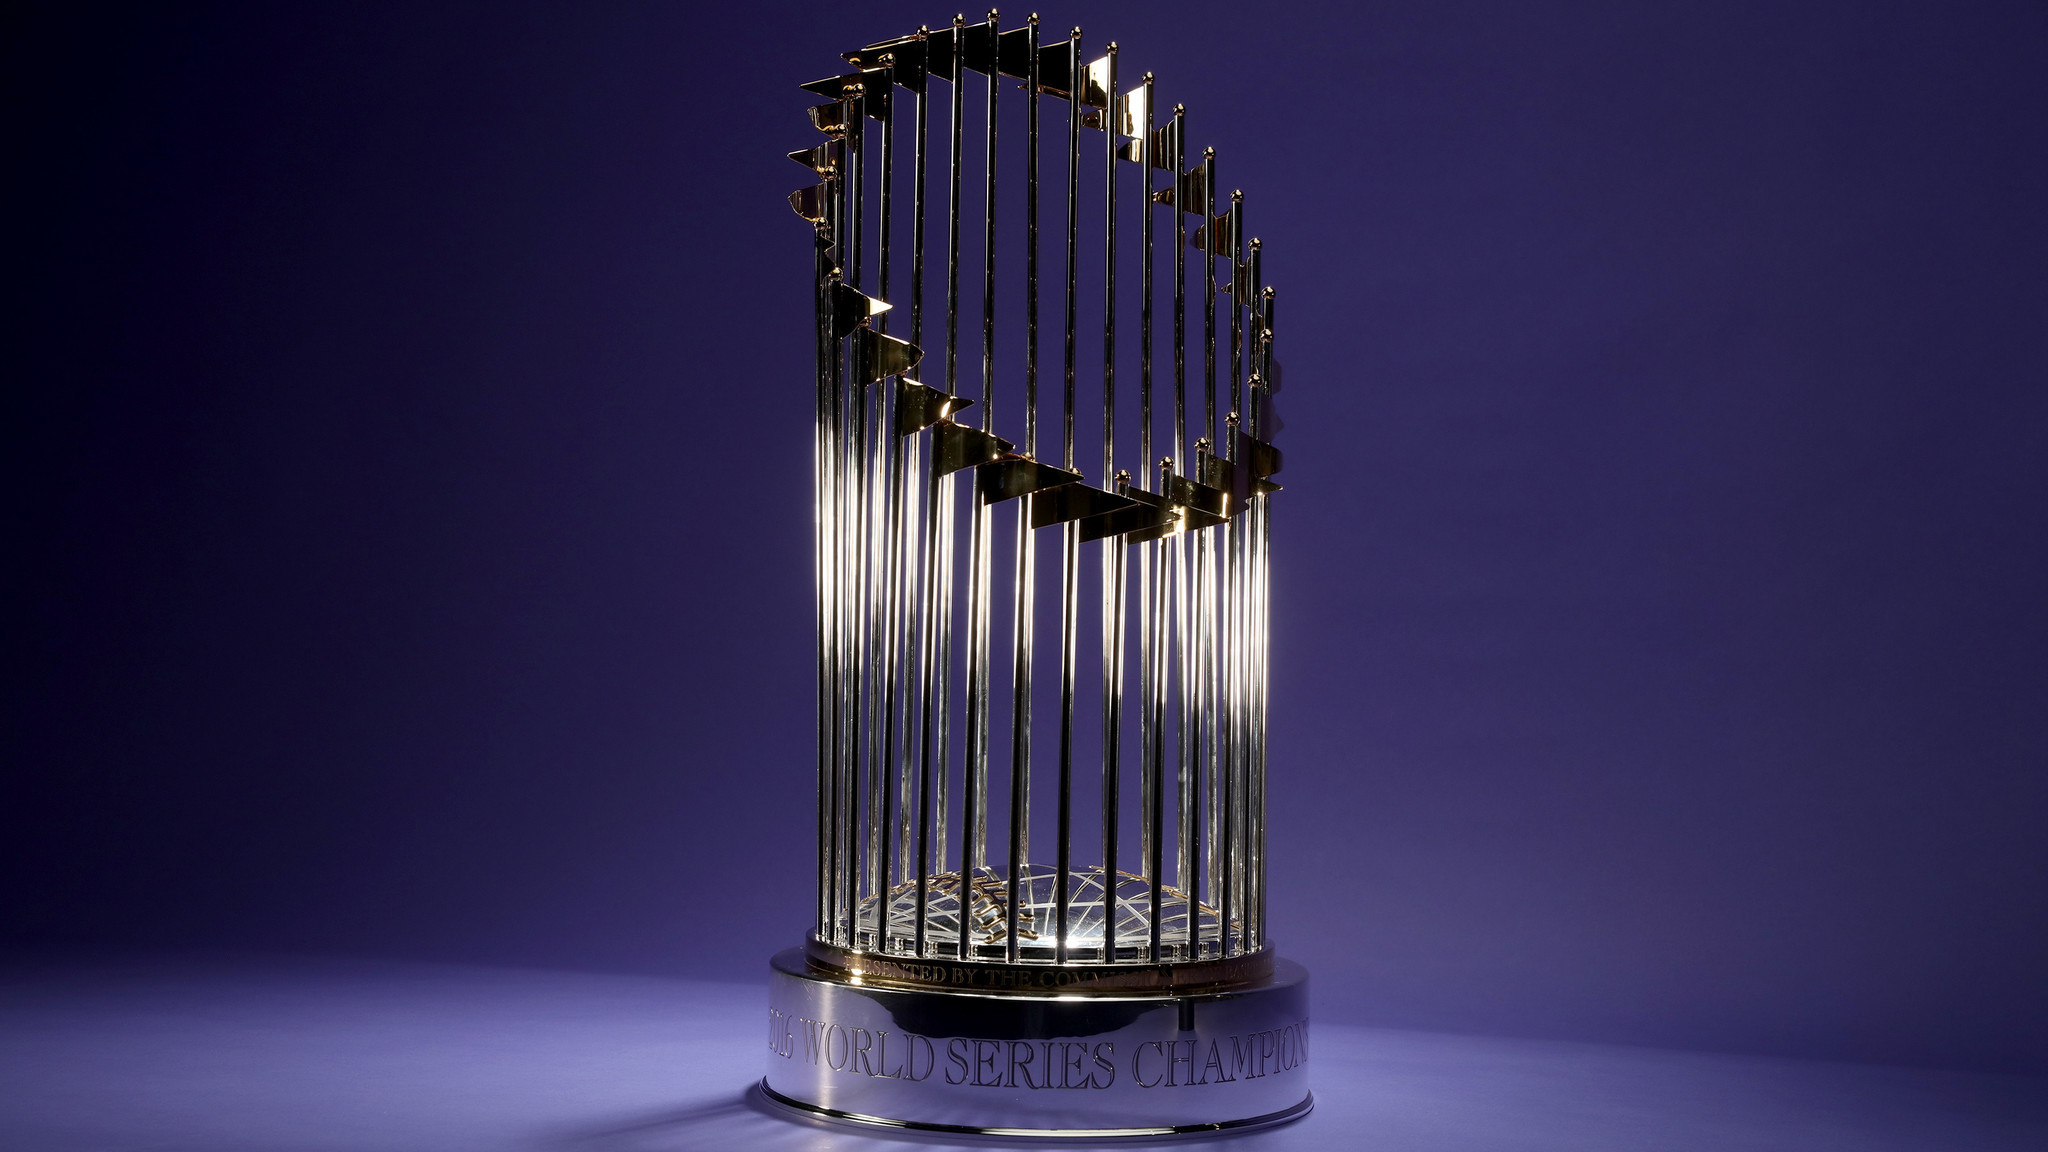 ct-cubs-world-series-trophy-damaged-report-20170502